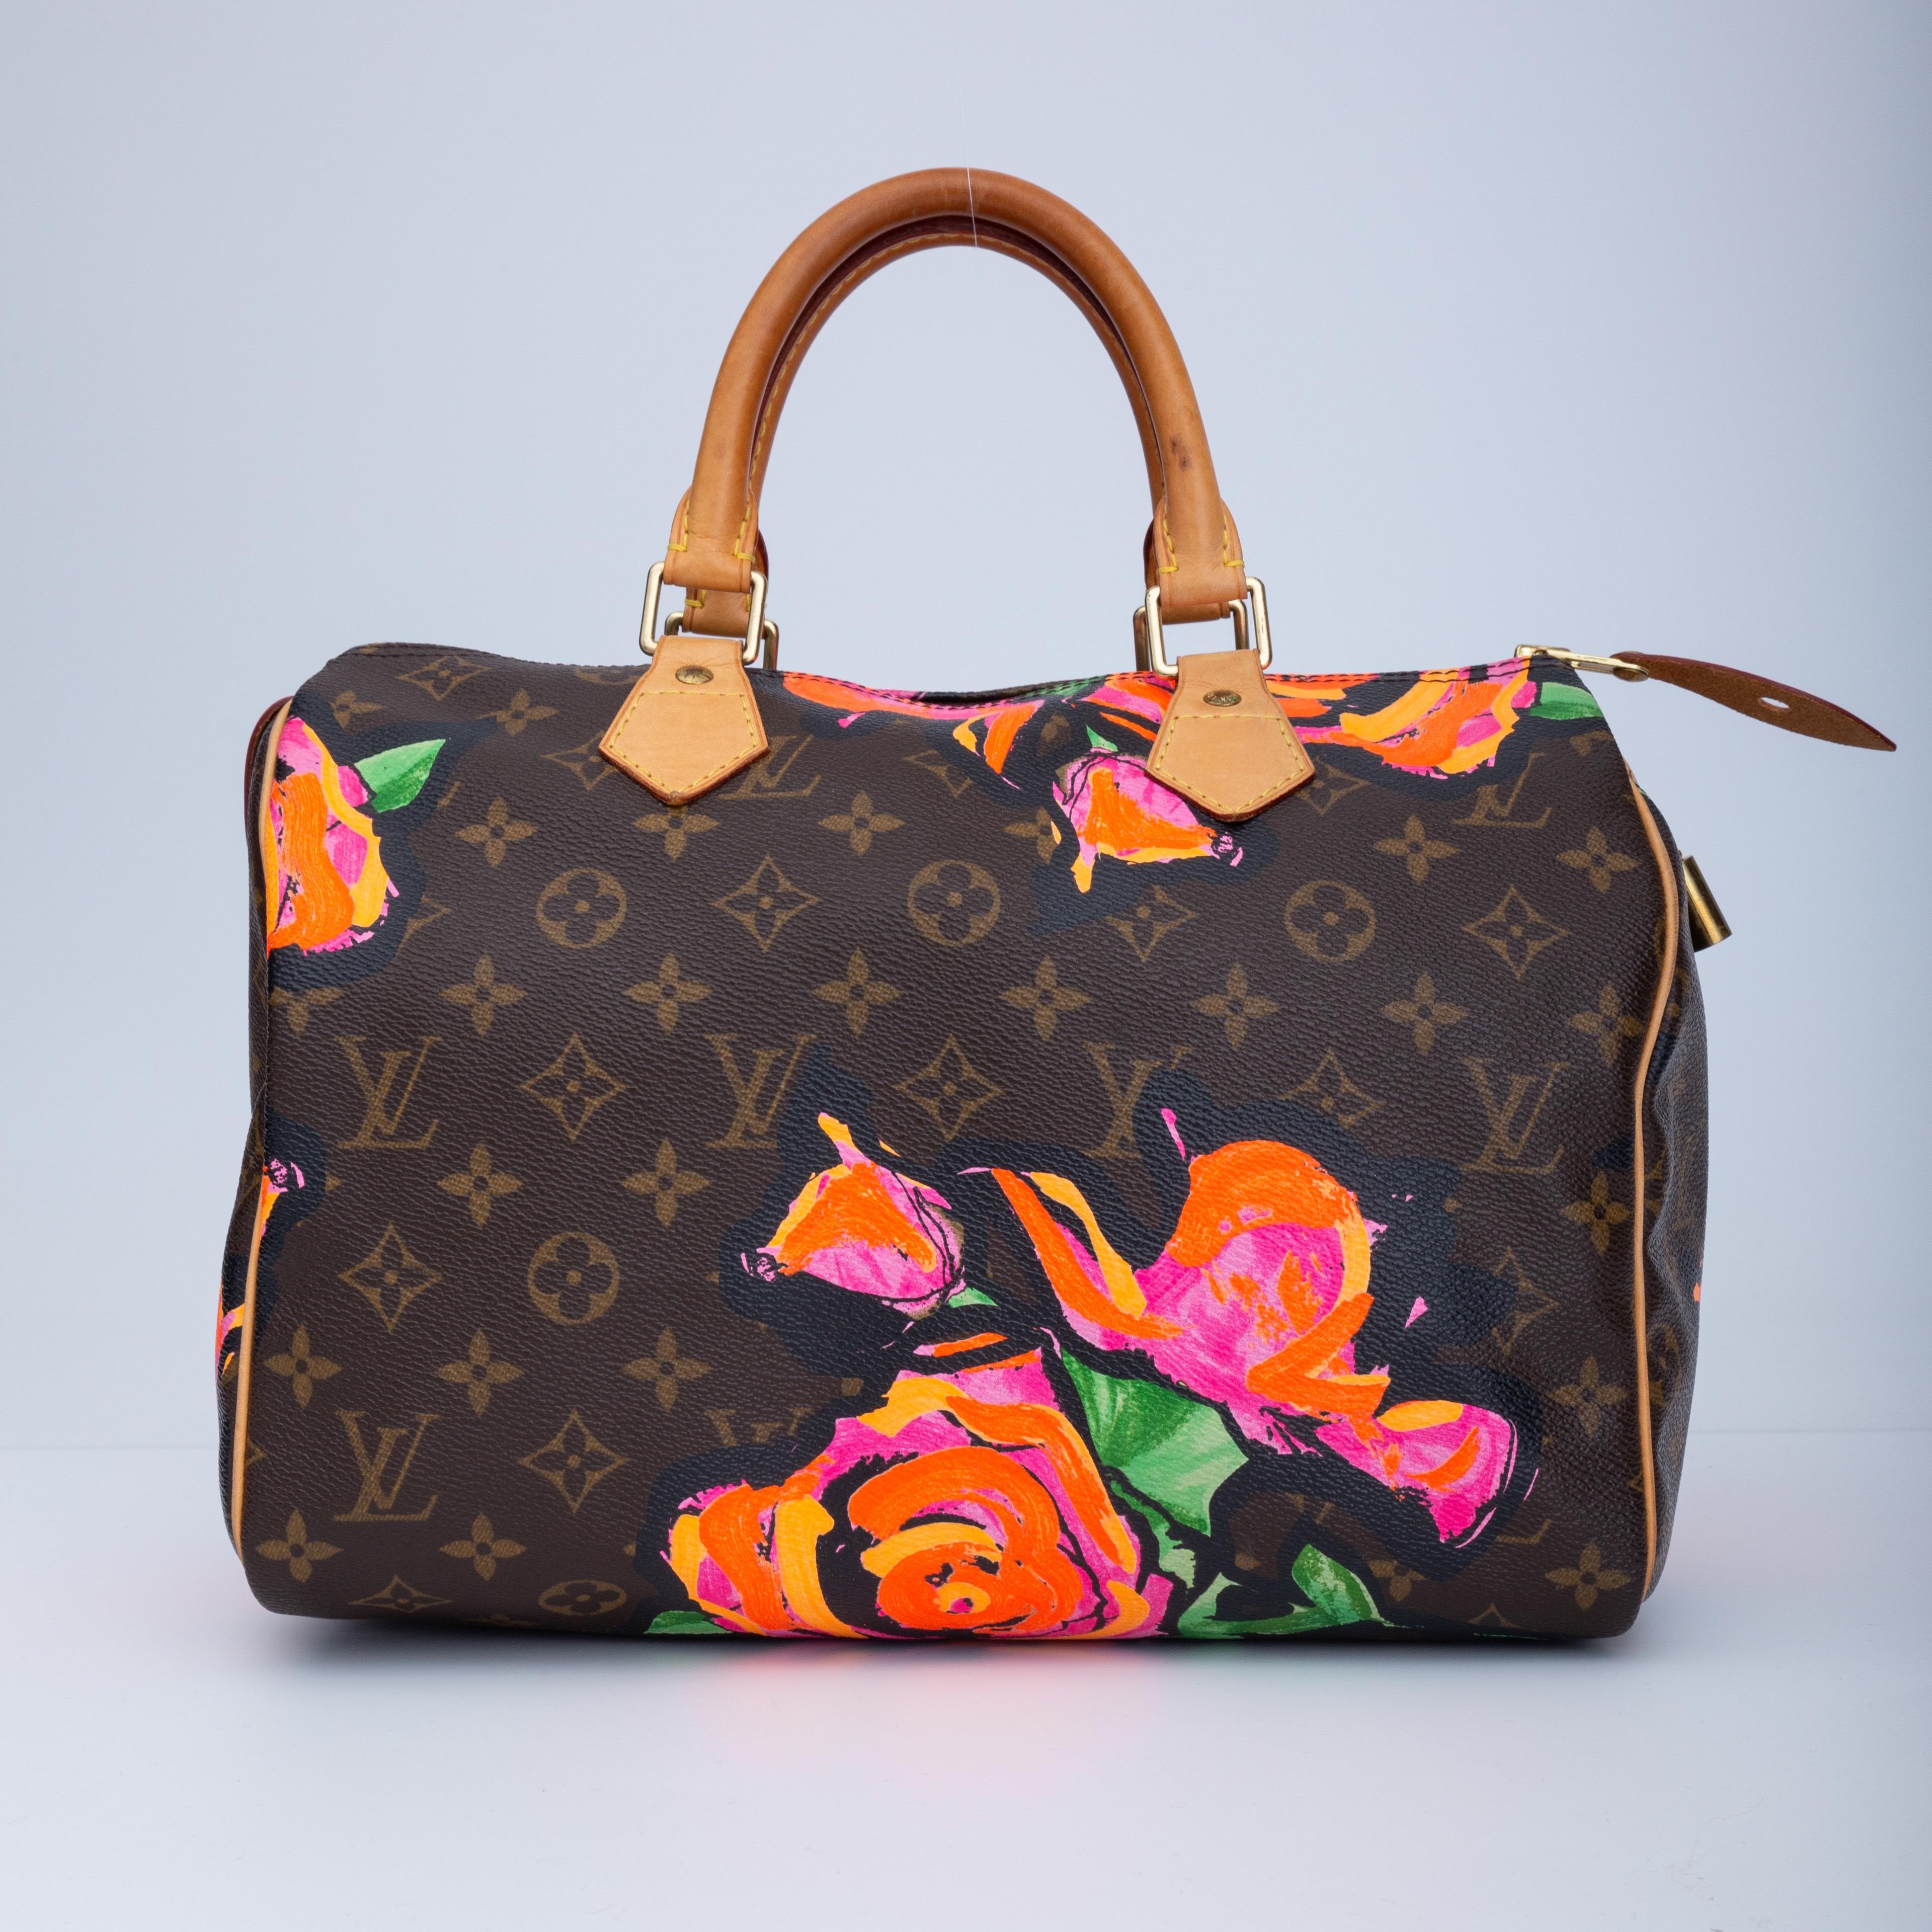 This limited edition Speedy bag is designed by Stephen Sprouse. The bag is made of traditional Louis Vuitton monogram on coated canvas with a vibrant print of decorative abstract roses in pink, orange, and green. The bag features vachetta rolled